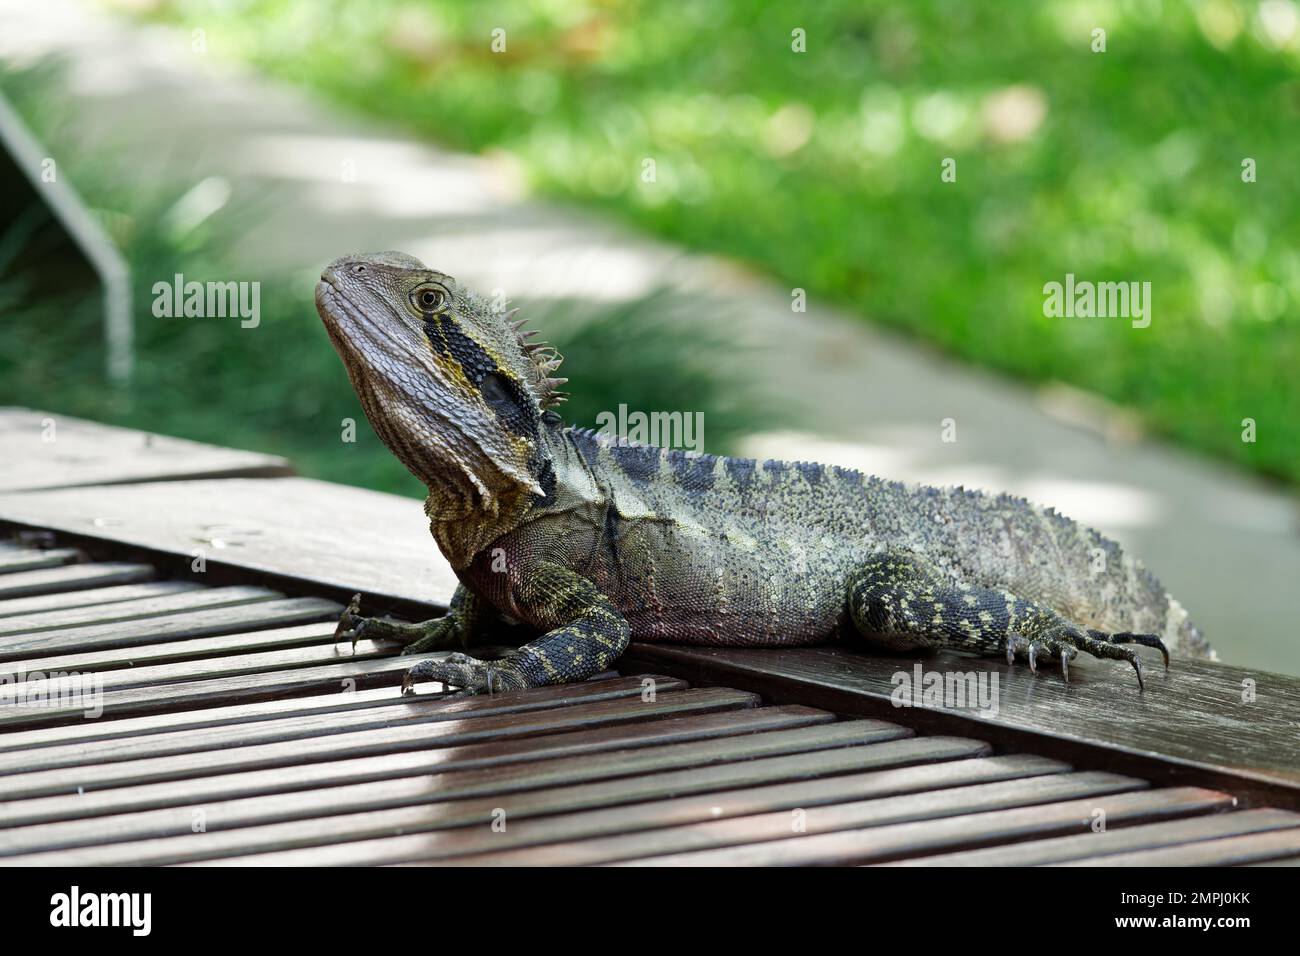 Eastern Water Dragon stationary in day Stock Photo